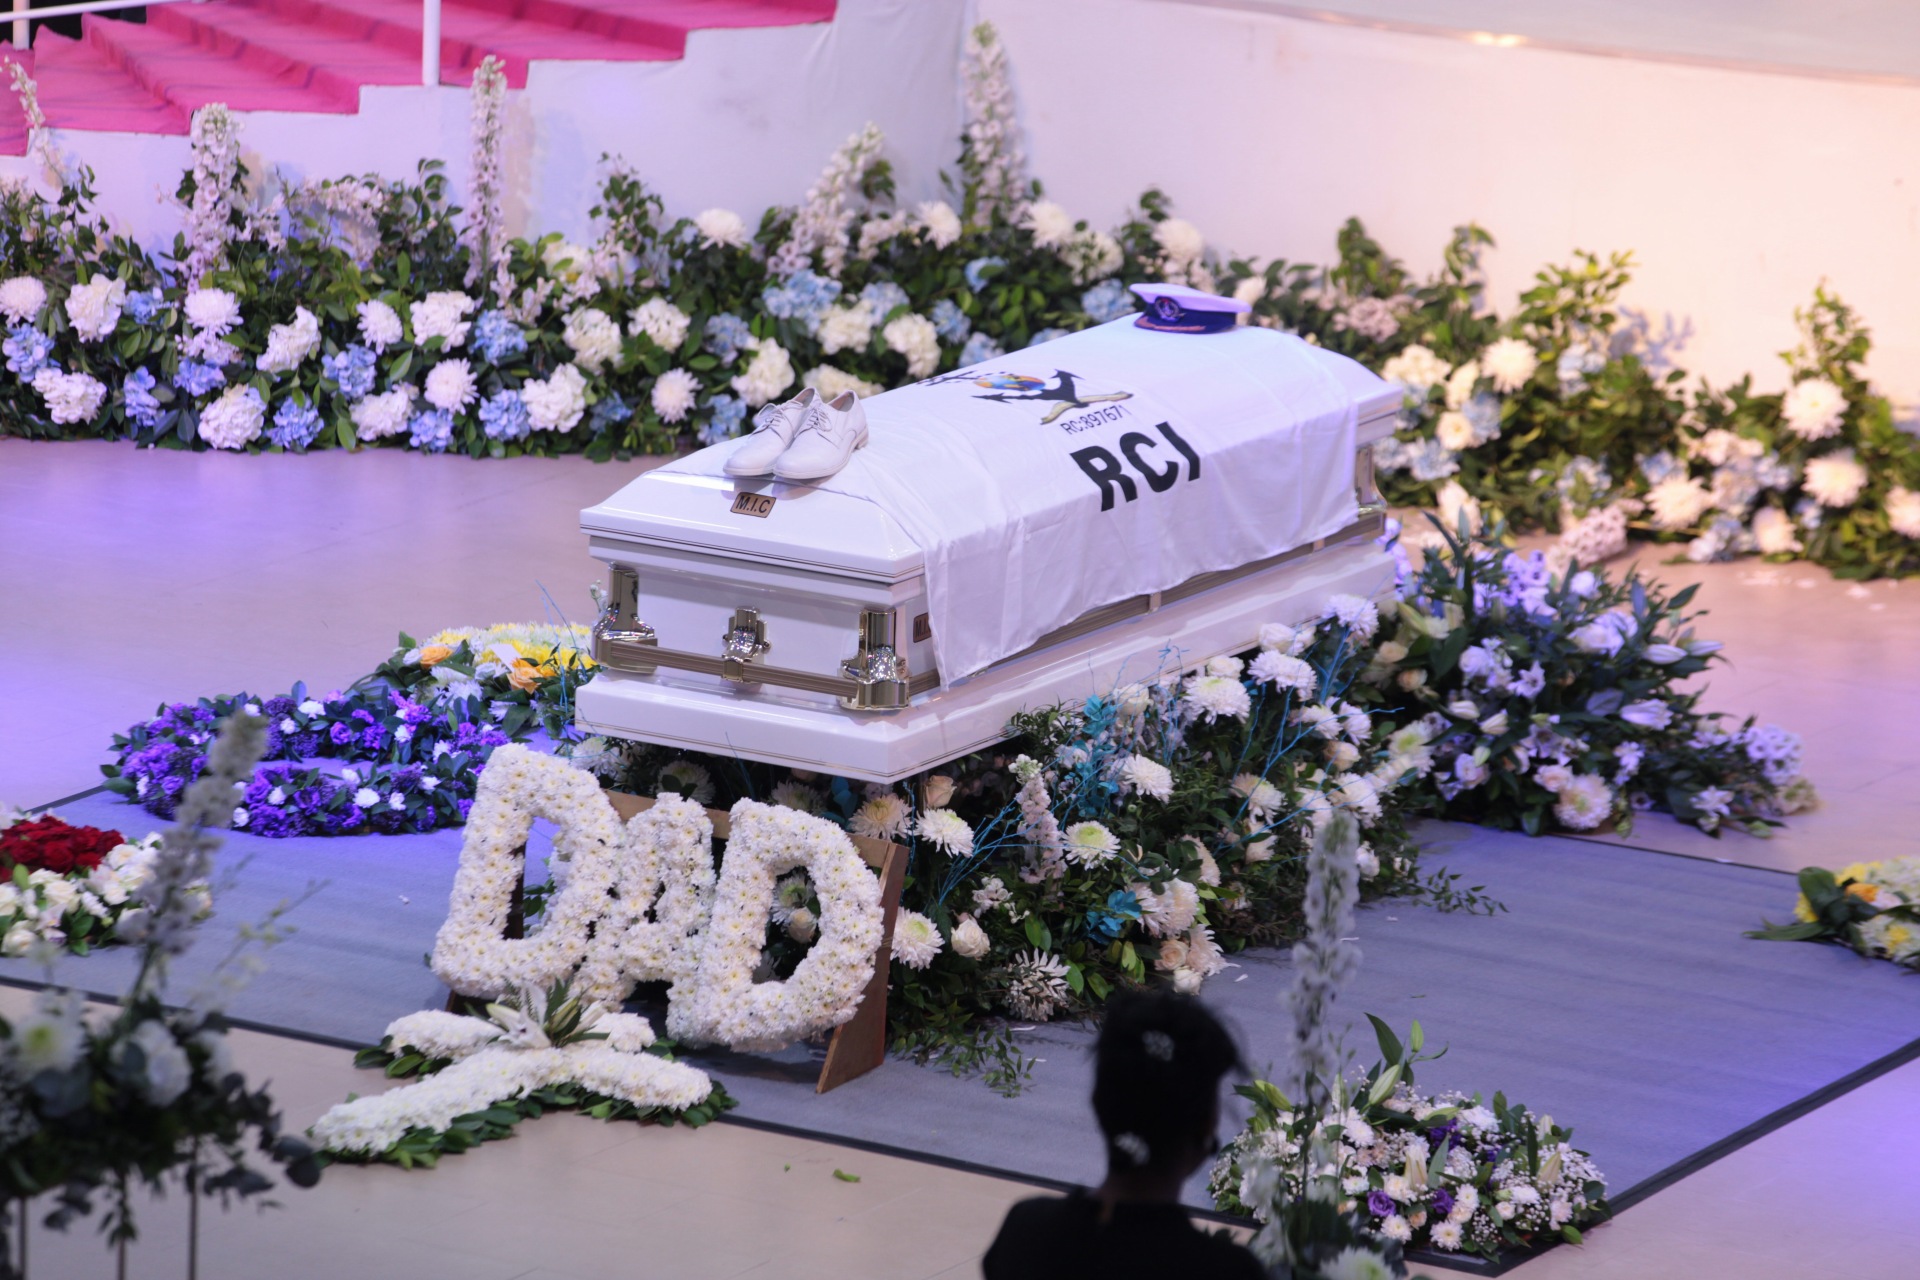 Remains of Pastor Dare Adeboye at the farewell service at the Youth Centre, Redemption Camp